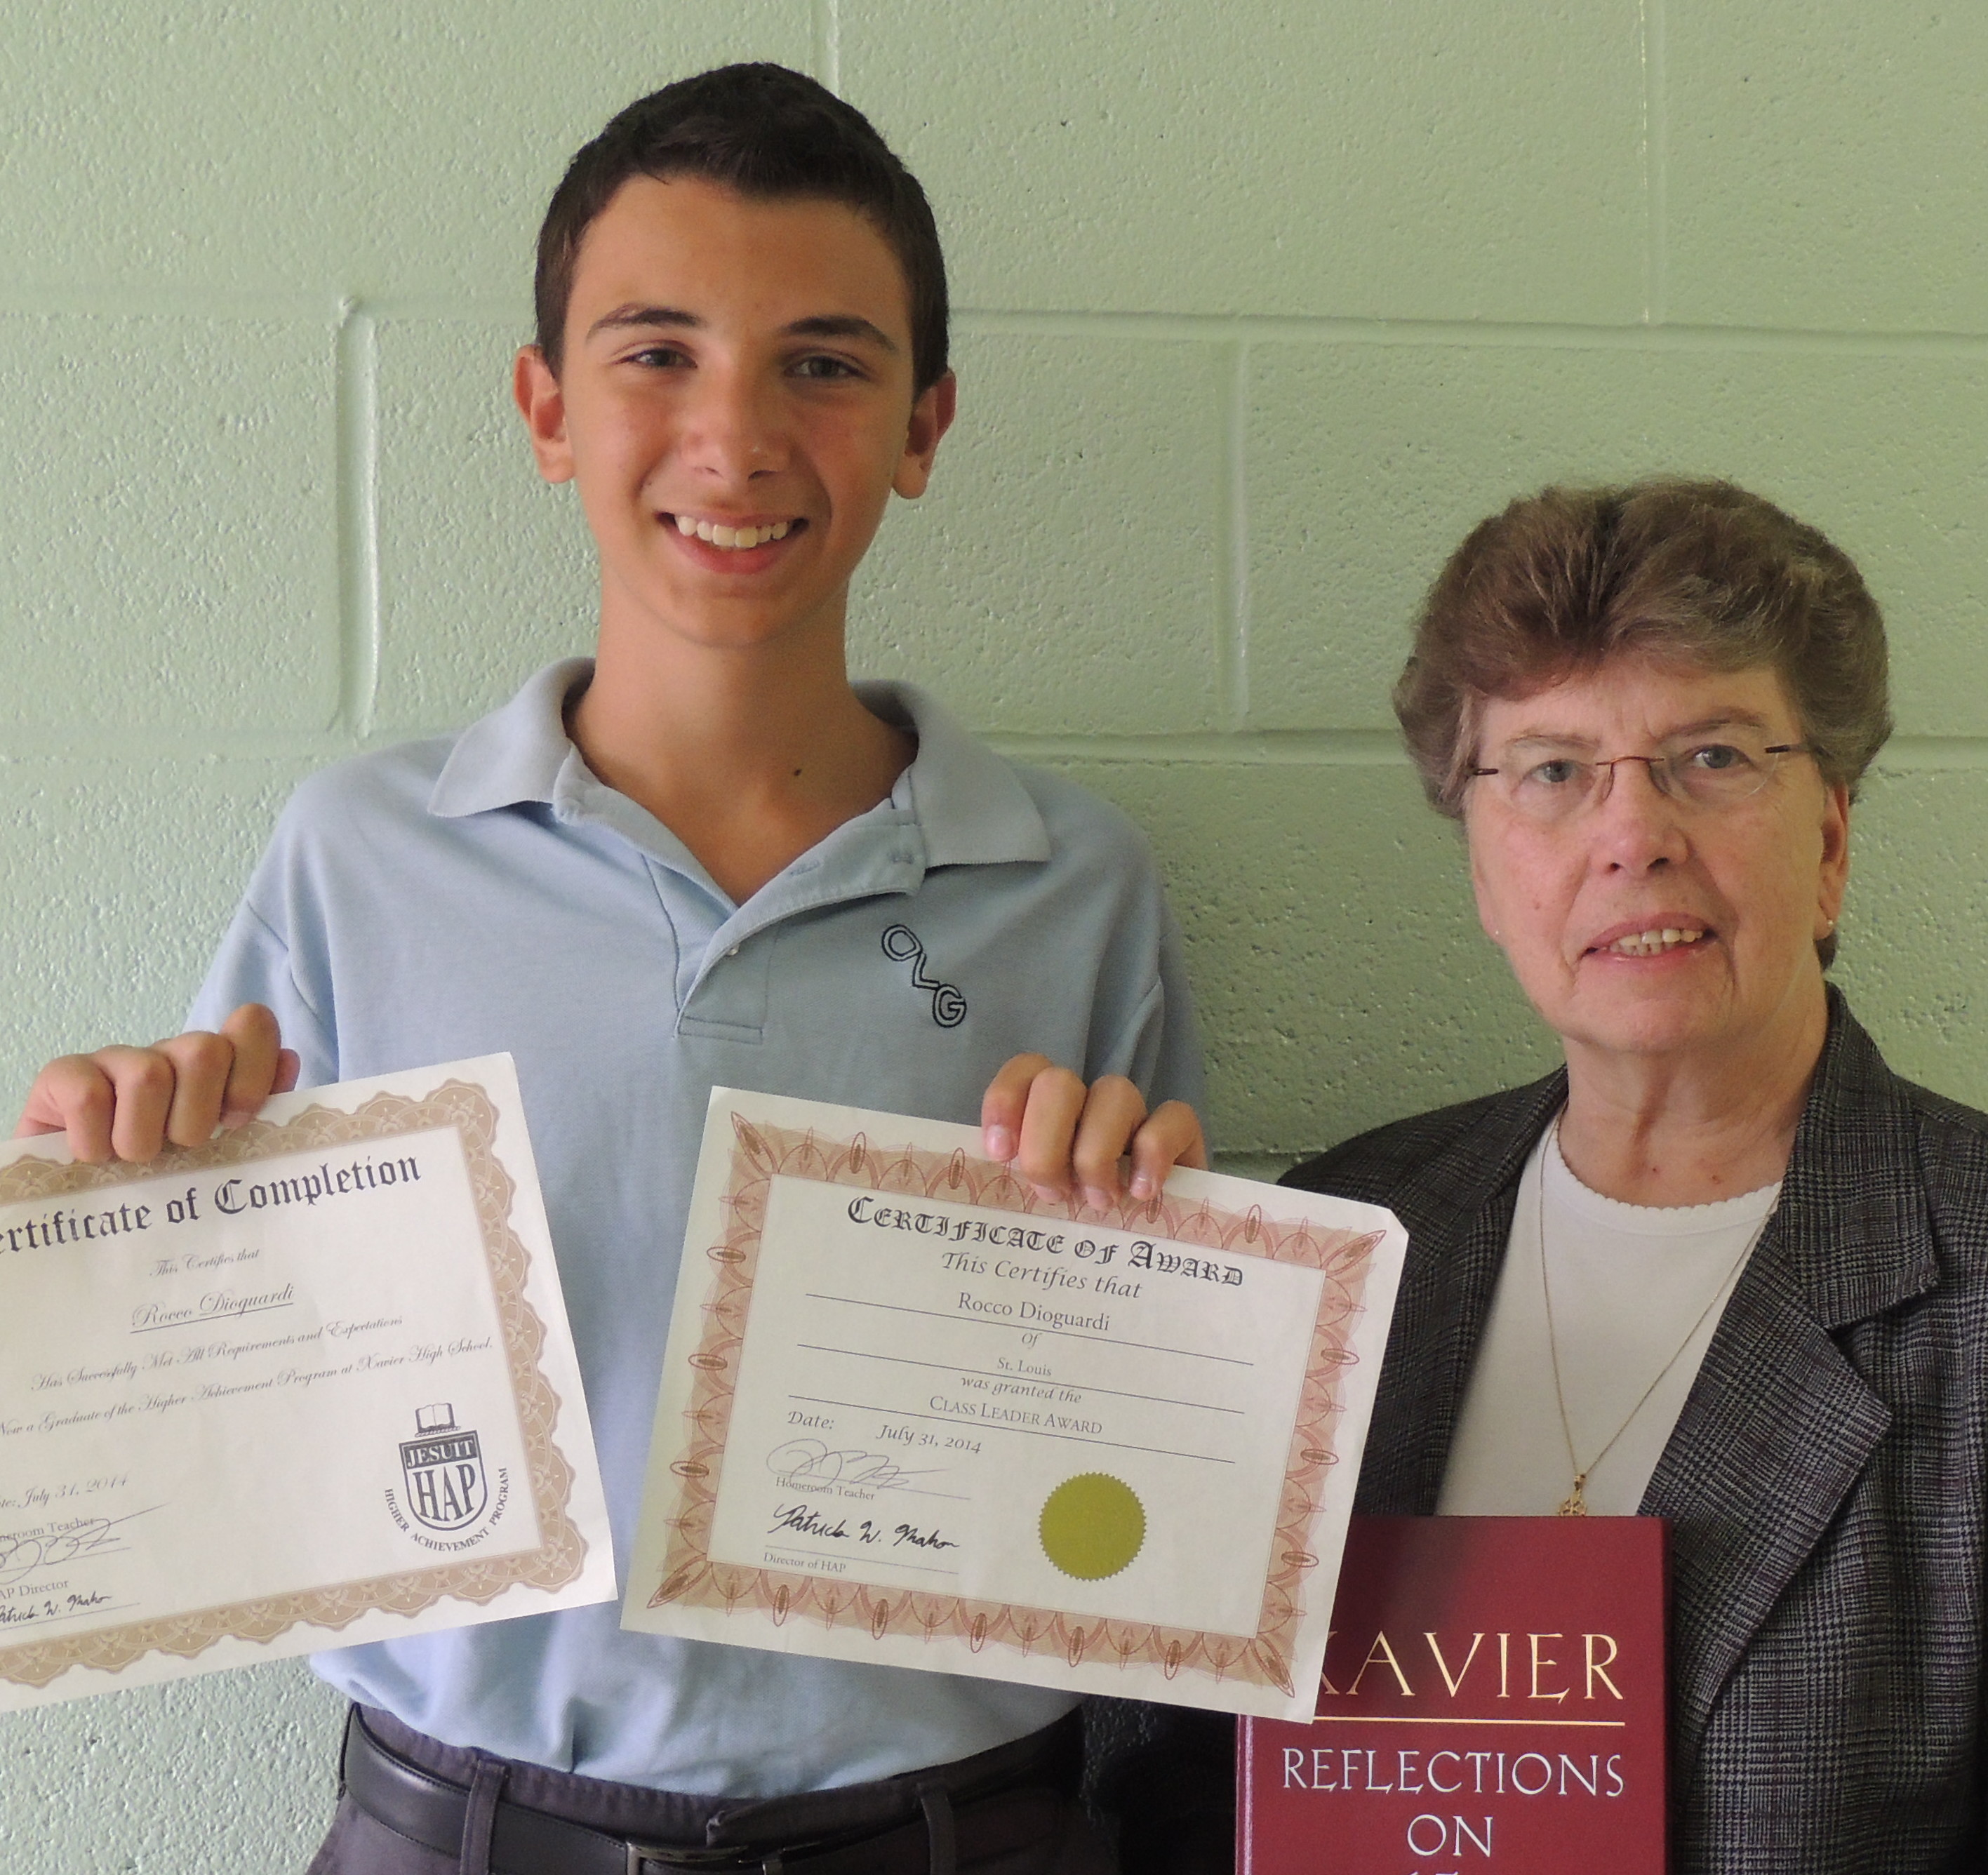 Dioguardi poses with his principal at Our Lady of Guadalupe, Sister Dolores F. Crepeau, C.S.J.